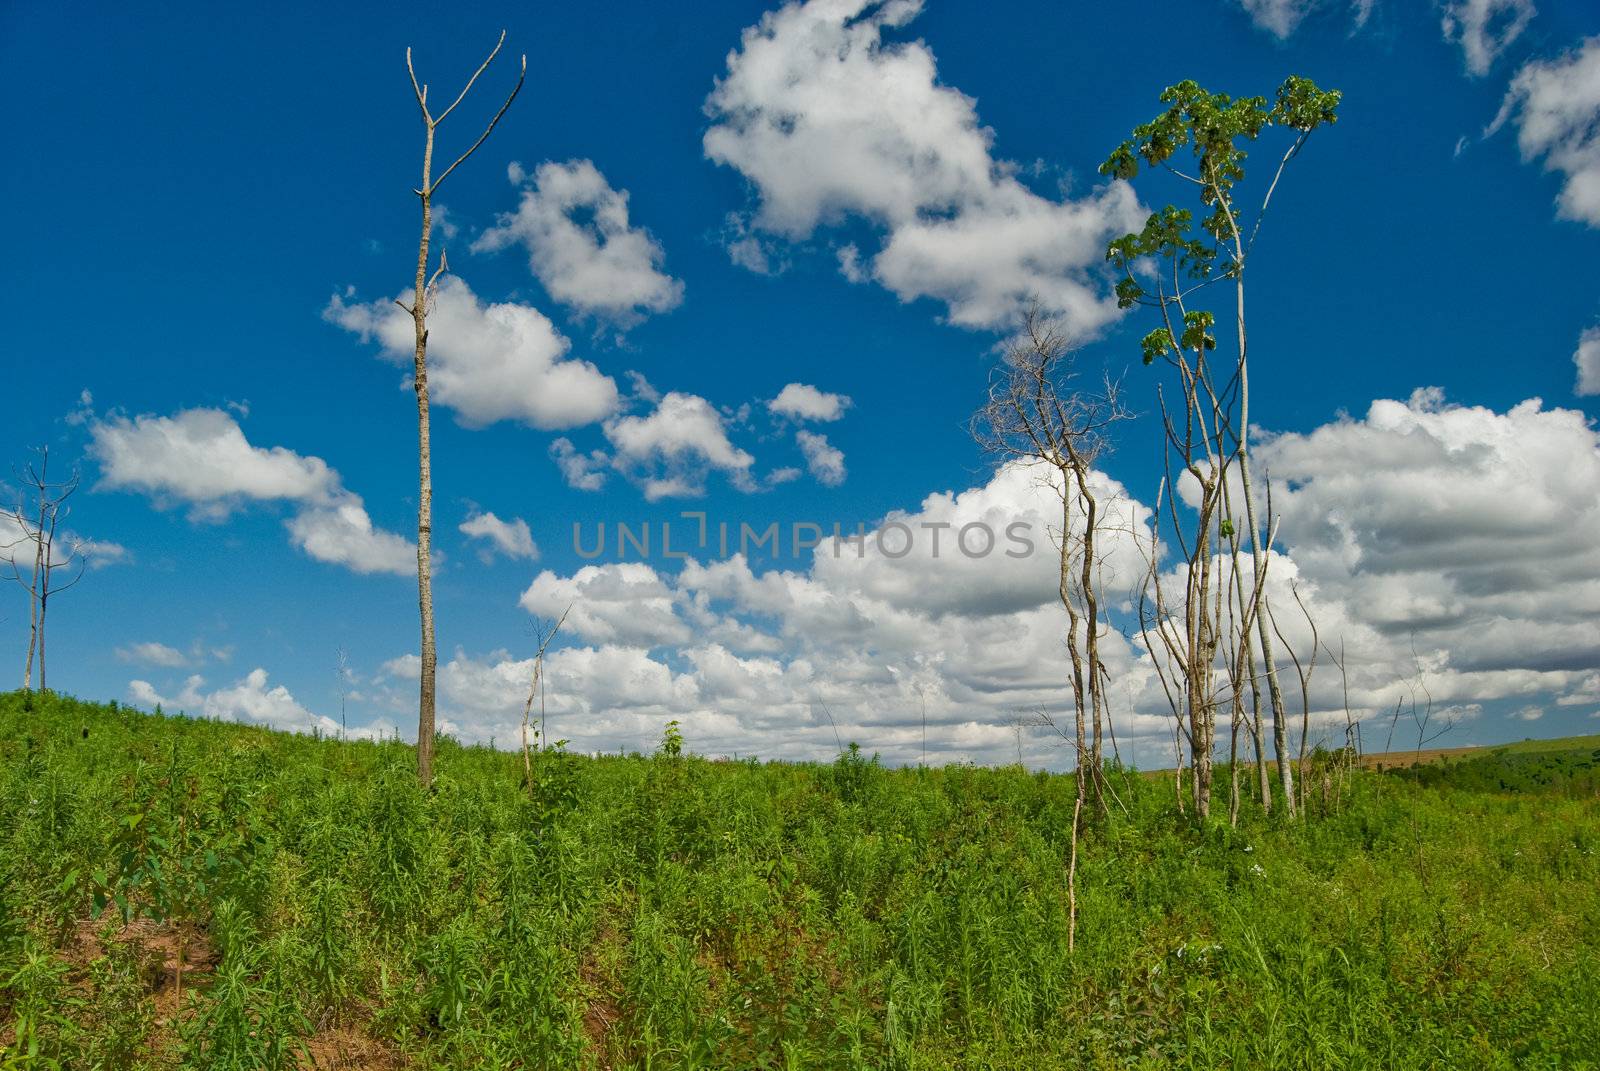 Trunks of dead trees in the area of deforestation to plant eucalyptus trees in southern Brazil.